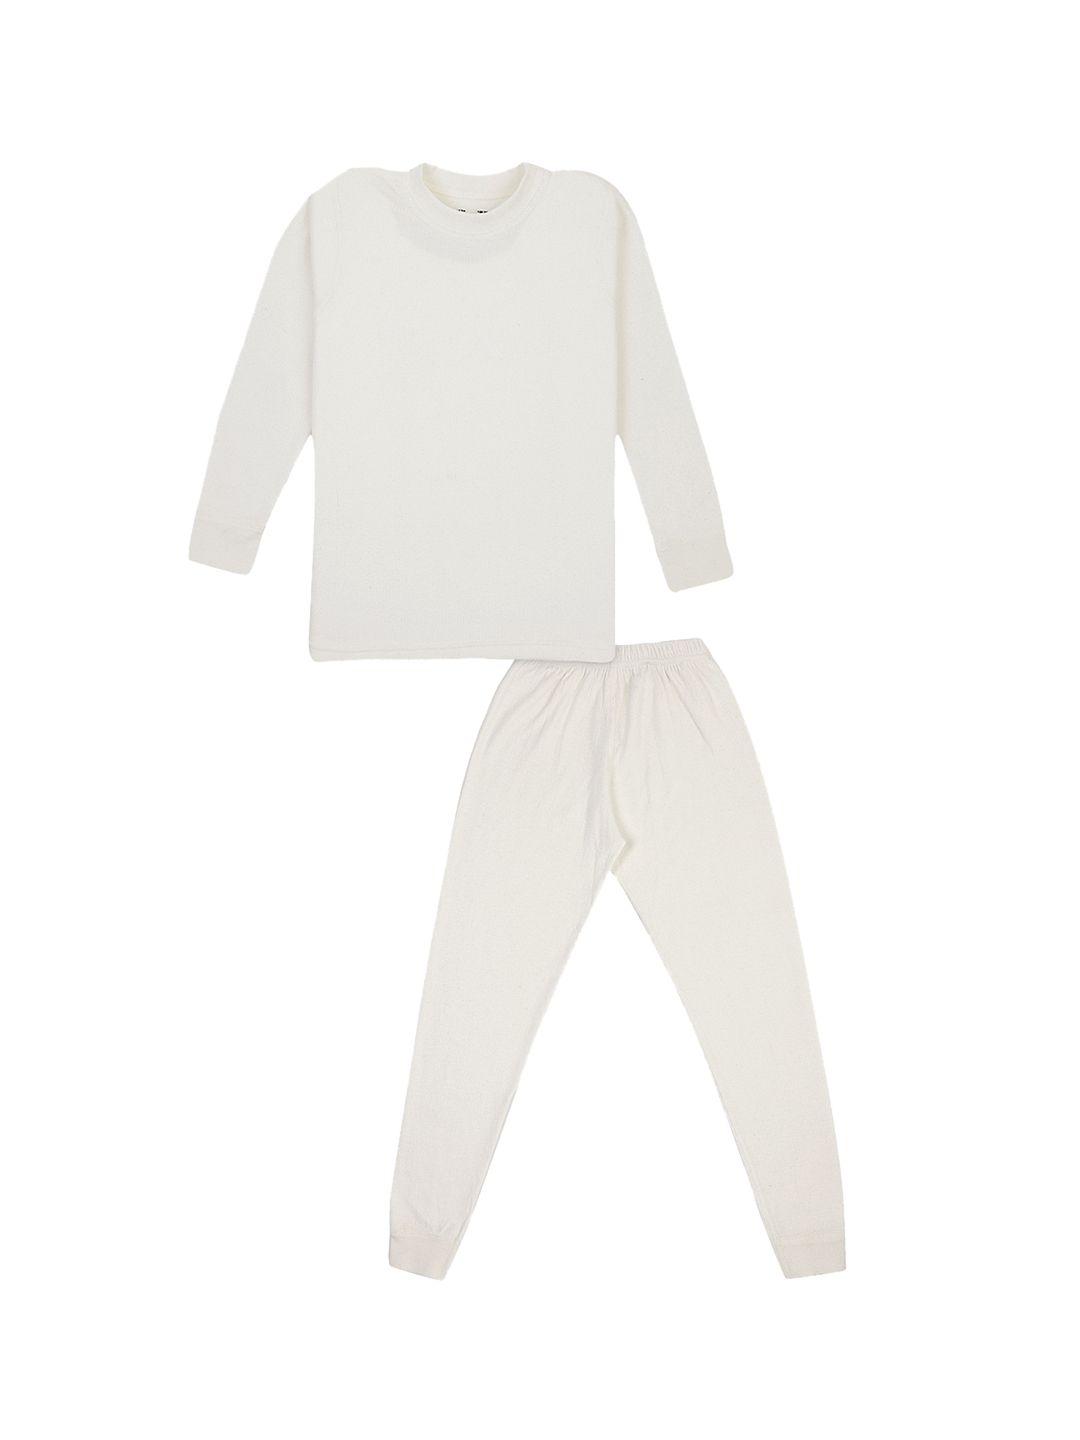 bodycare insider kids off-white solid thermal set